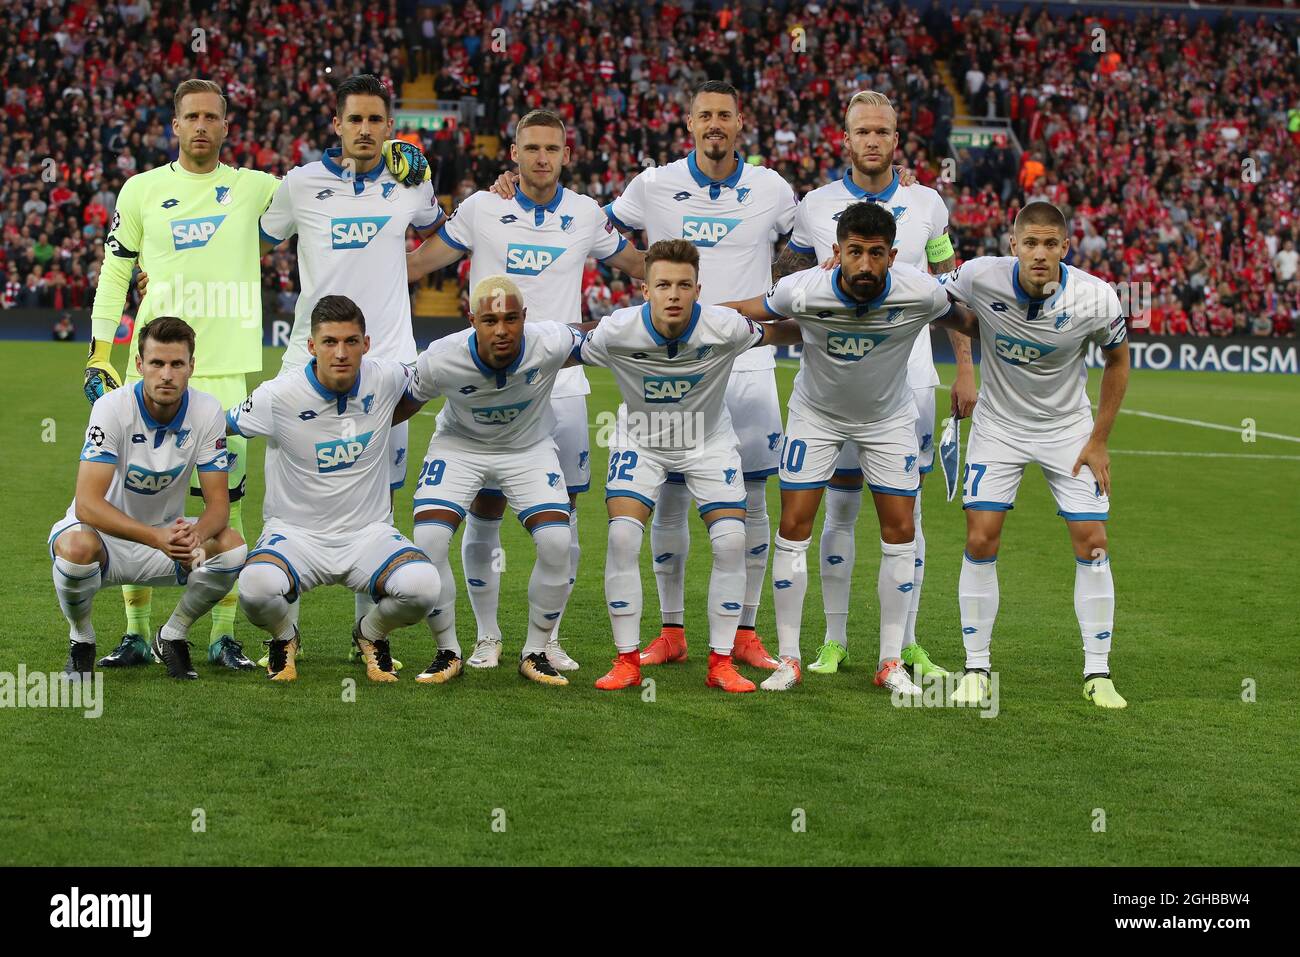 TSG 1899 Hoffenheim team group before the Champions League playoff round at  the Anfield Stadium, Liverpool.